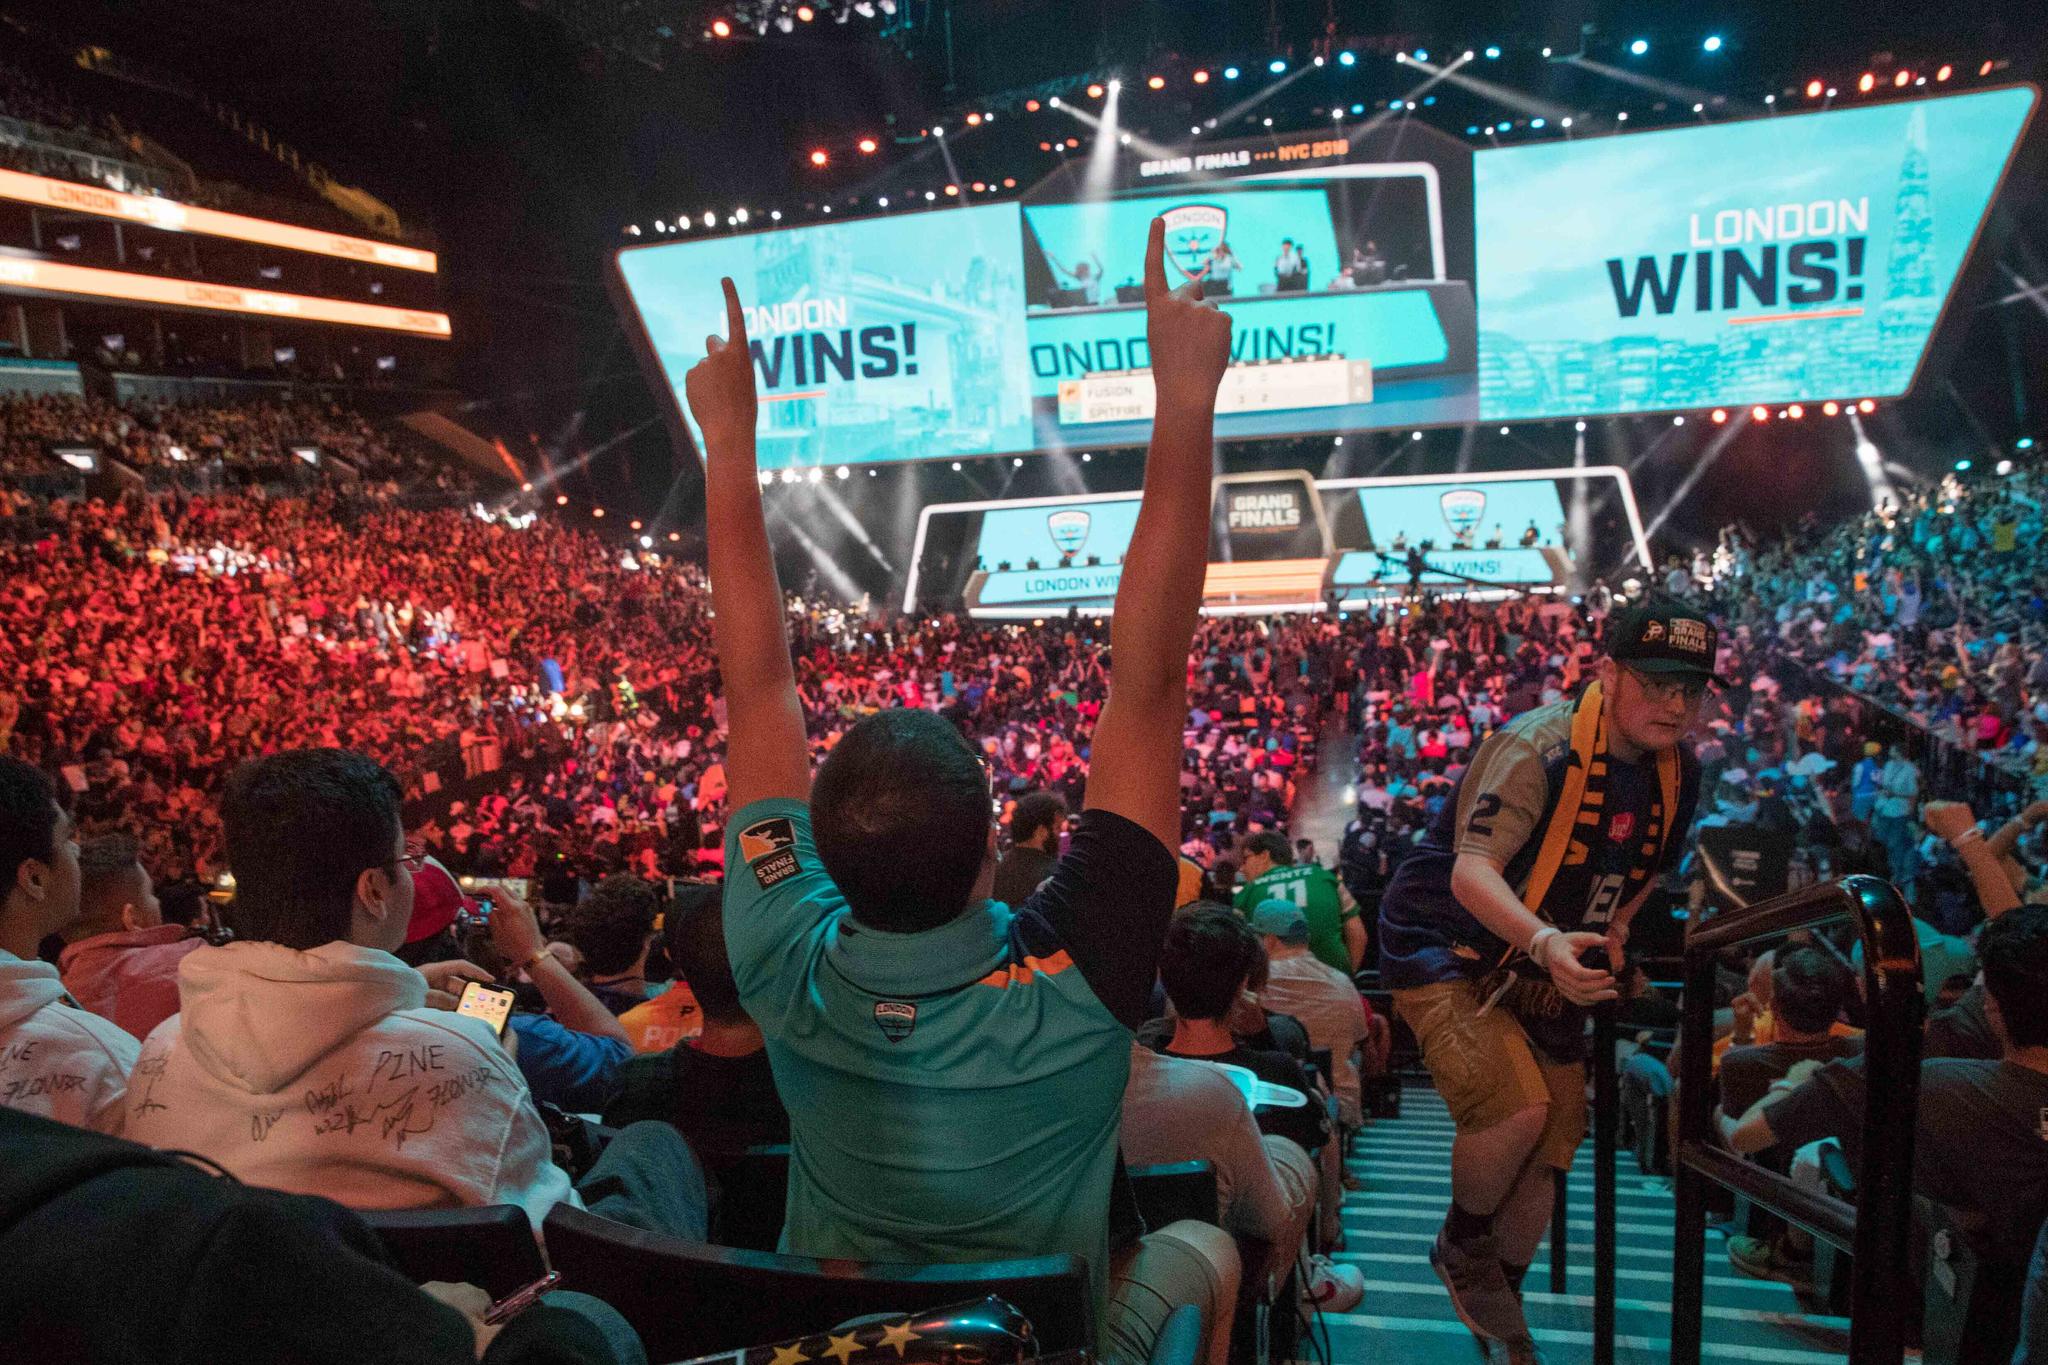 London Spitfire fan Rick Ybarra, of Plainfield, Ind., reacts after London won the second game against the Philadelphia Fusion during the Overwatch League Grand Finals competition at Barclays Center in New York